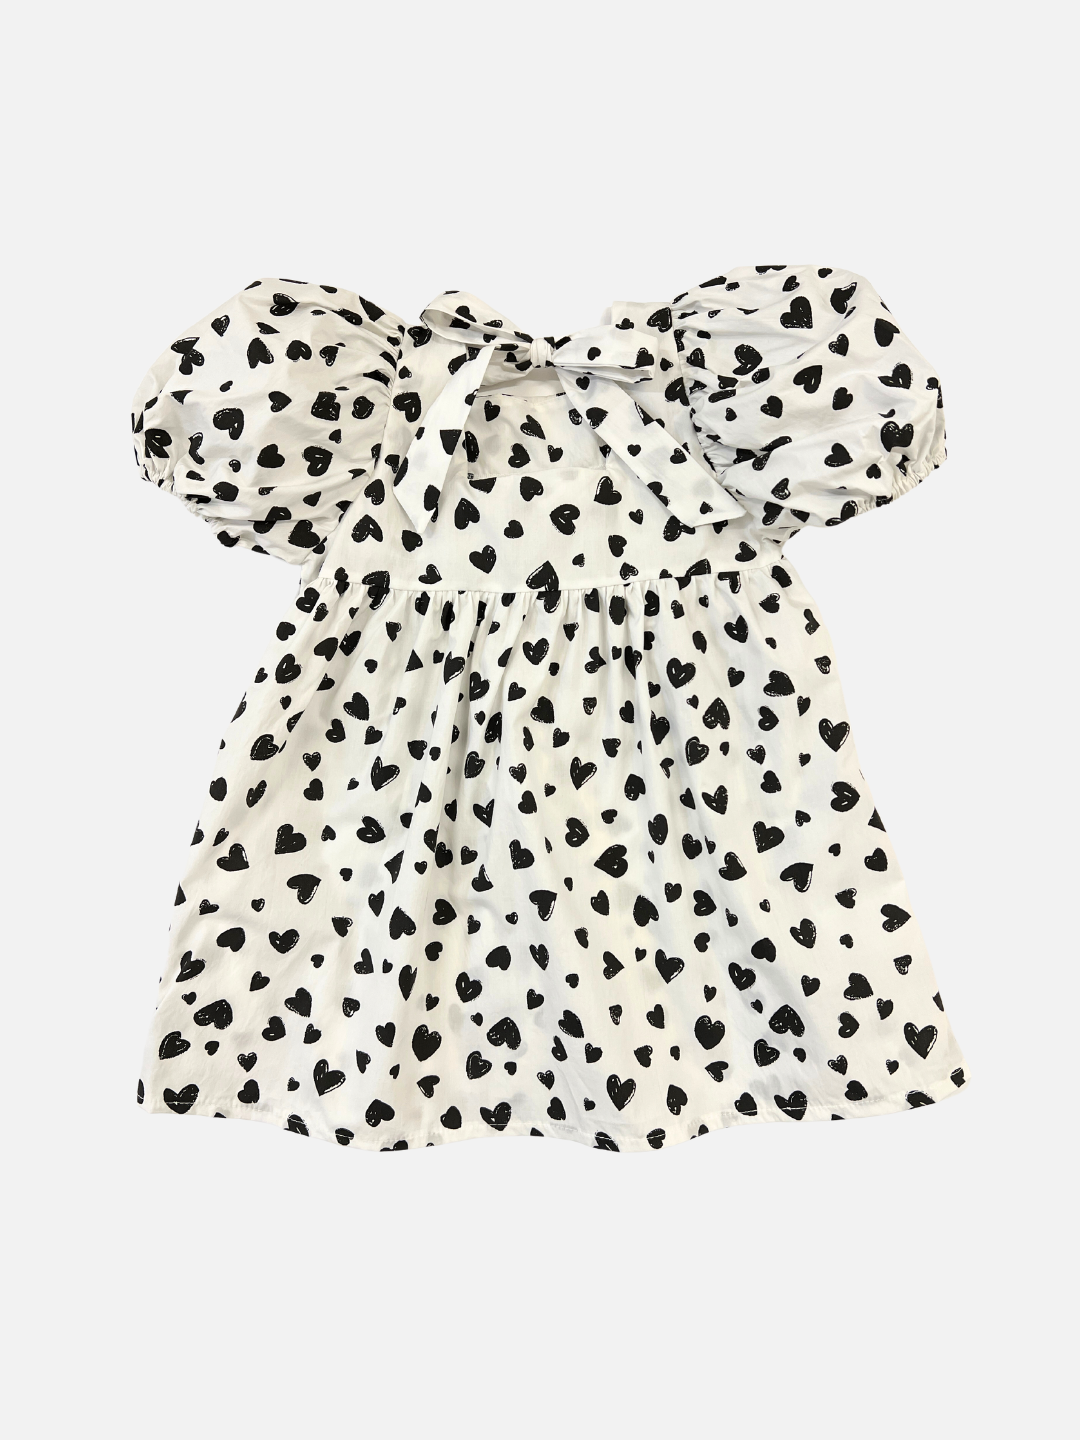 Back view of a kids' puff-sleeved dress in a pattern of black hearts on a white background, bow tied at the neck